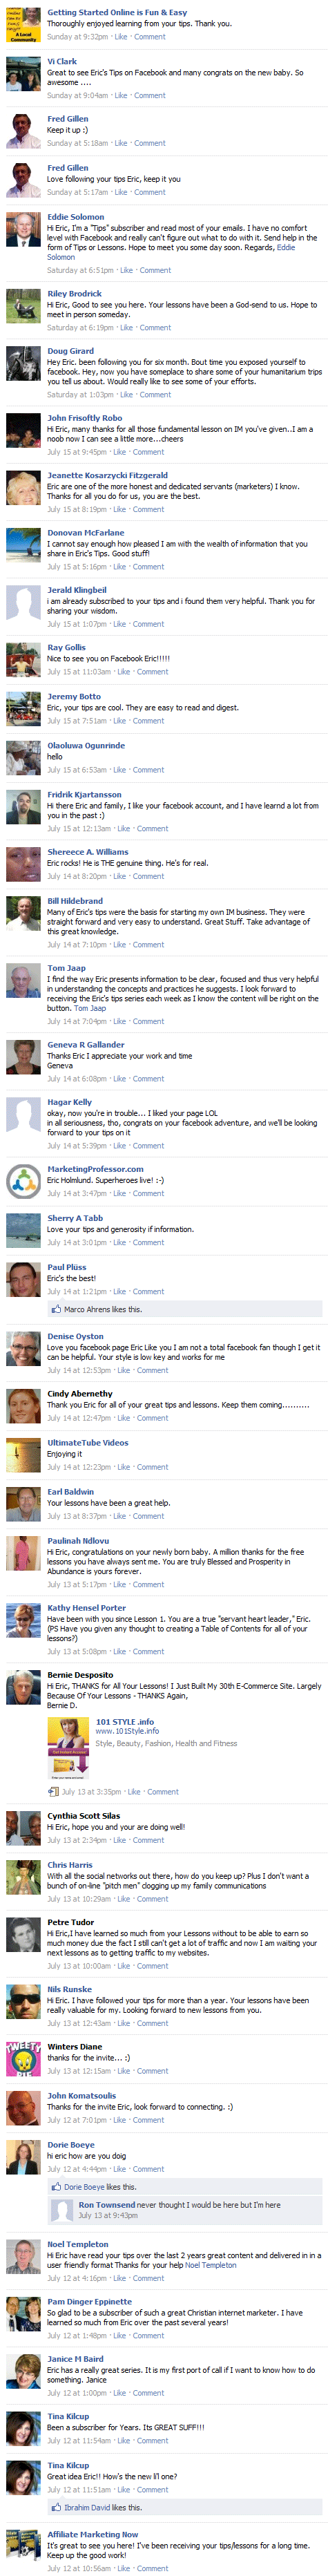 facebook comments